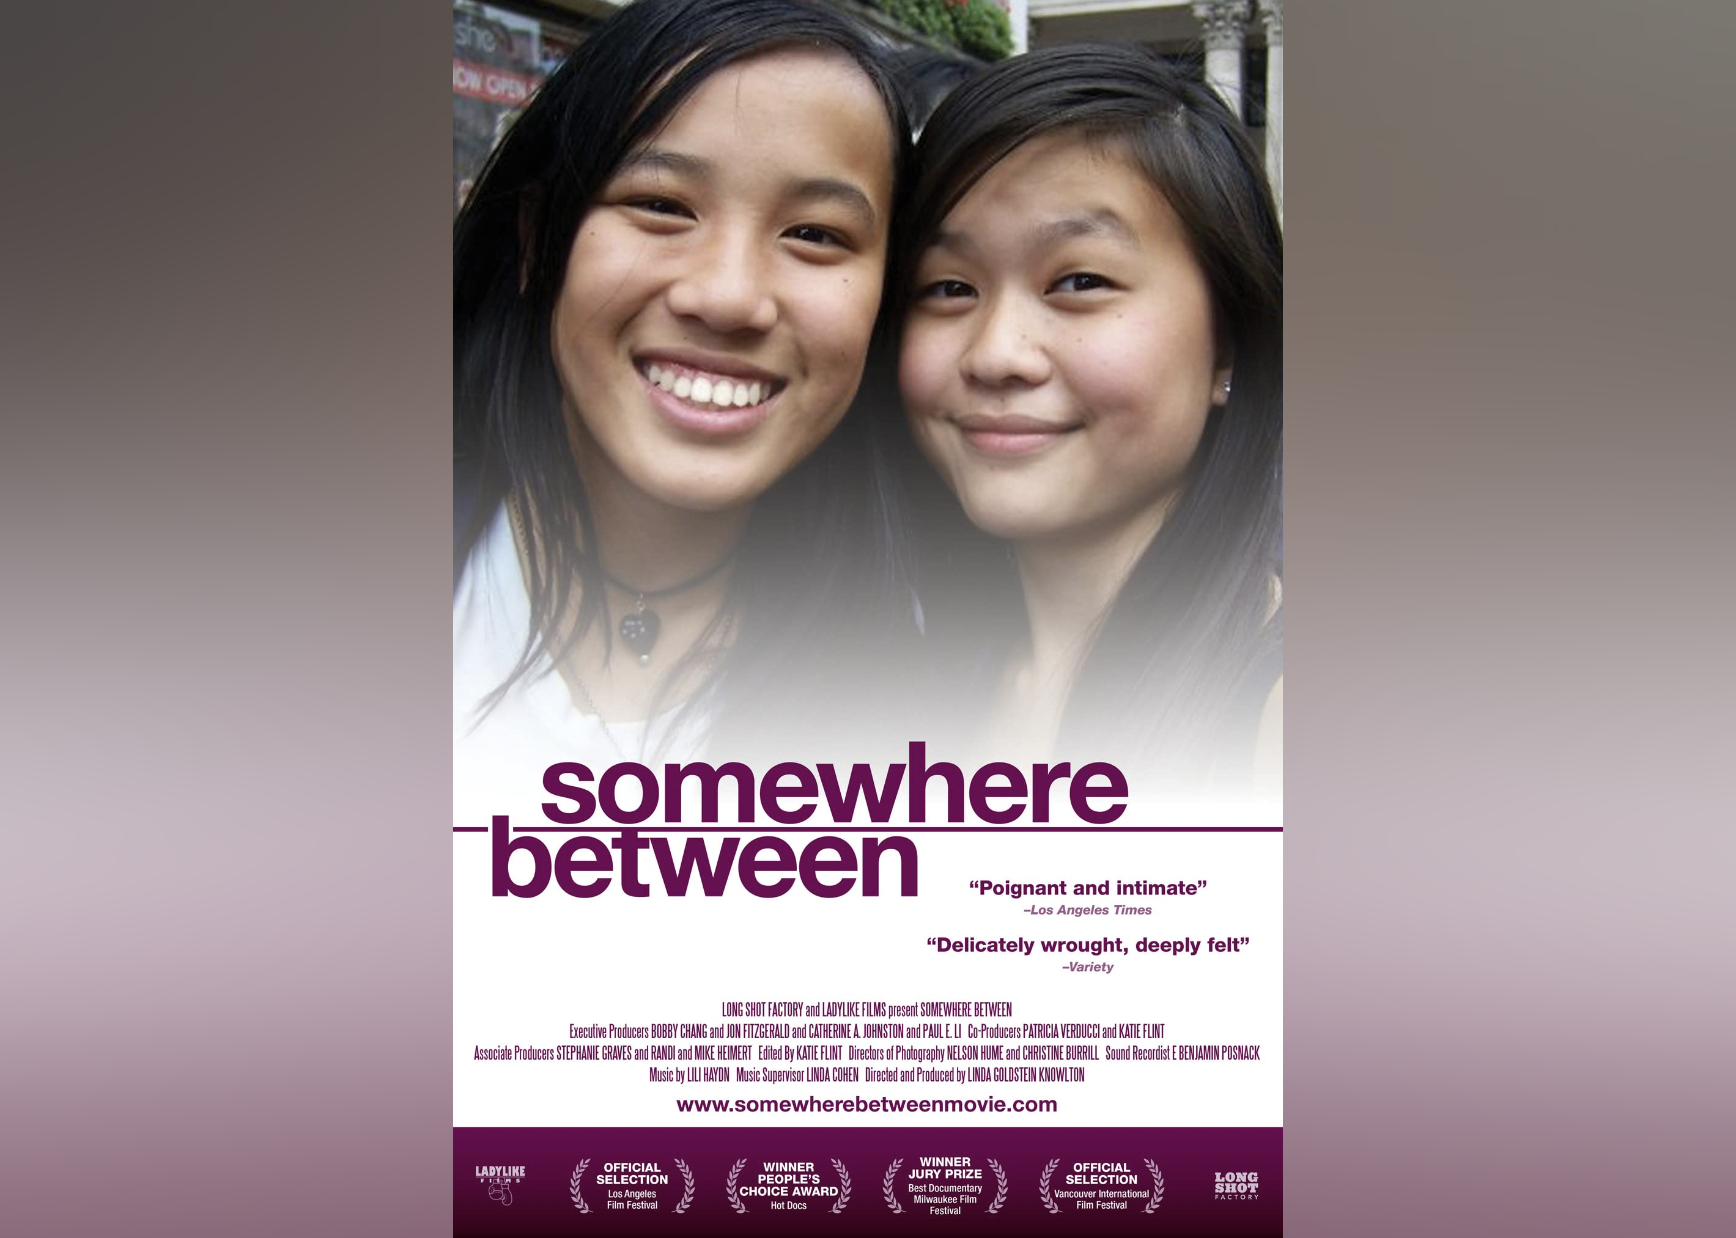 Promotional poster from the film "Somewhere Between."